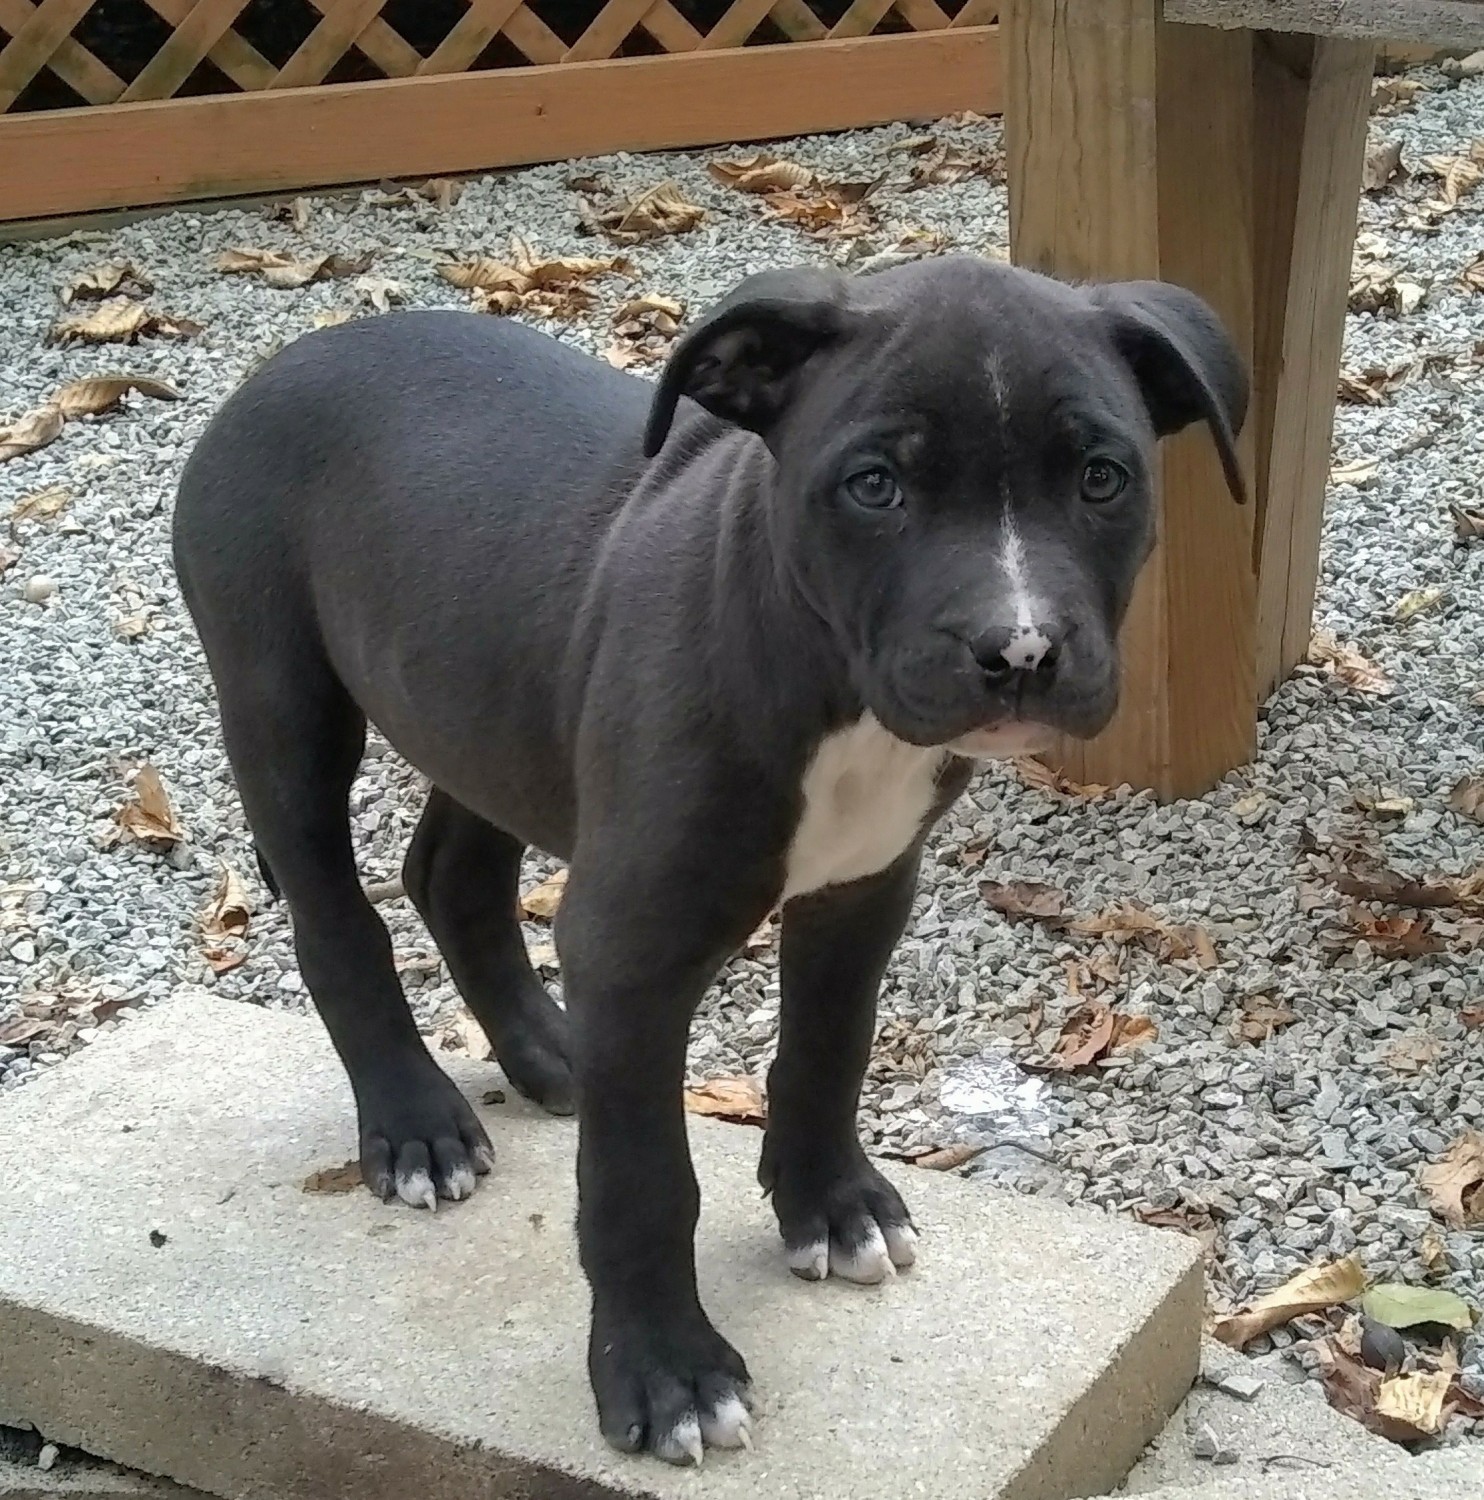 9 week old blue nose pitbull puppy